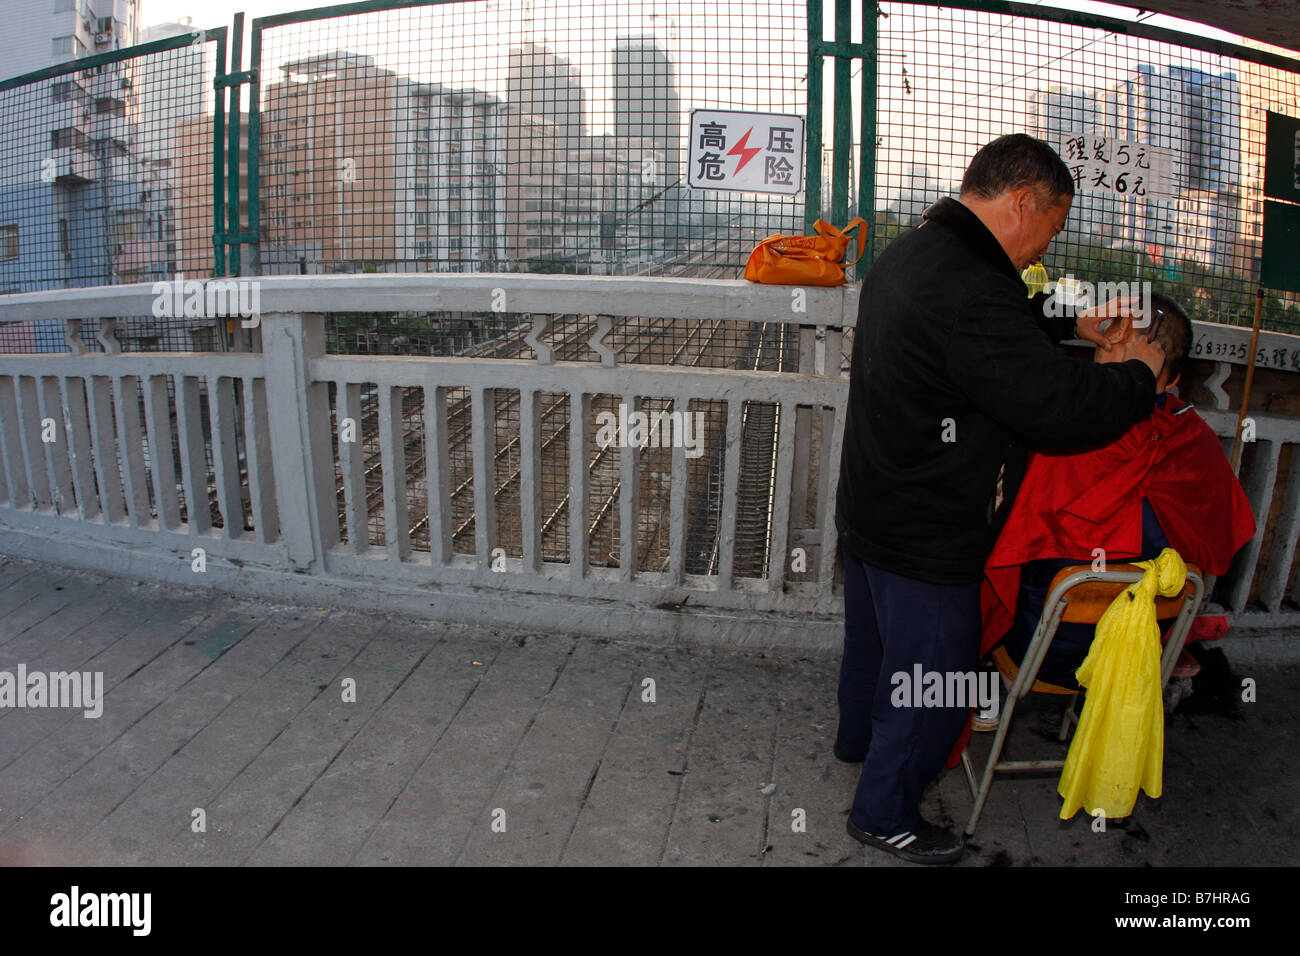 An unregulated self made street barber shop in Guangzhou China Stock Photo